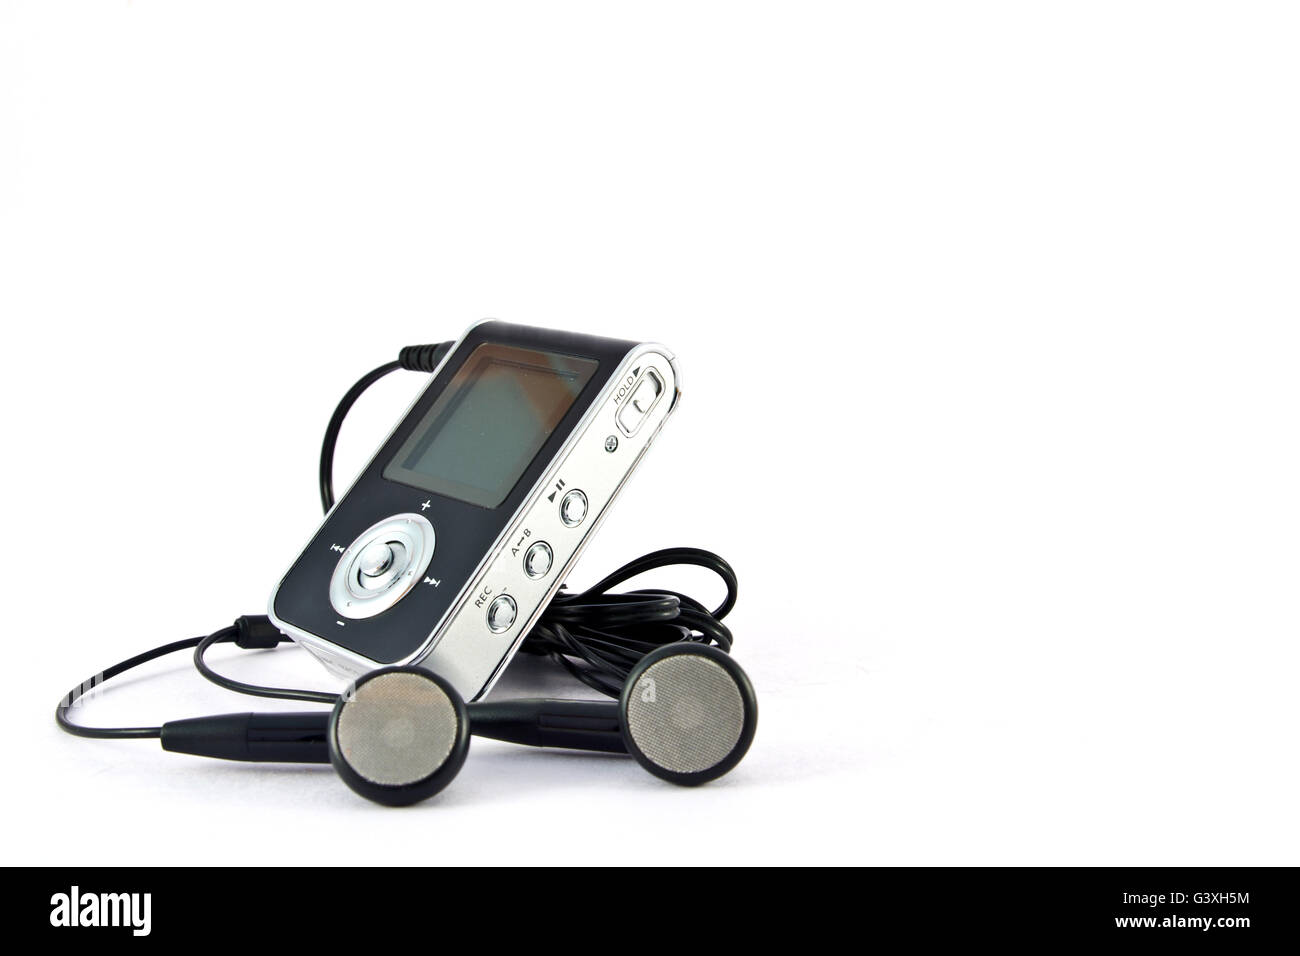 mp3 player and headphones isolated on white background Stock Photo